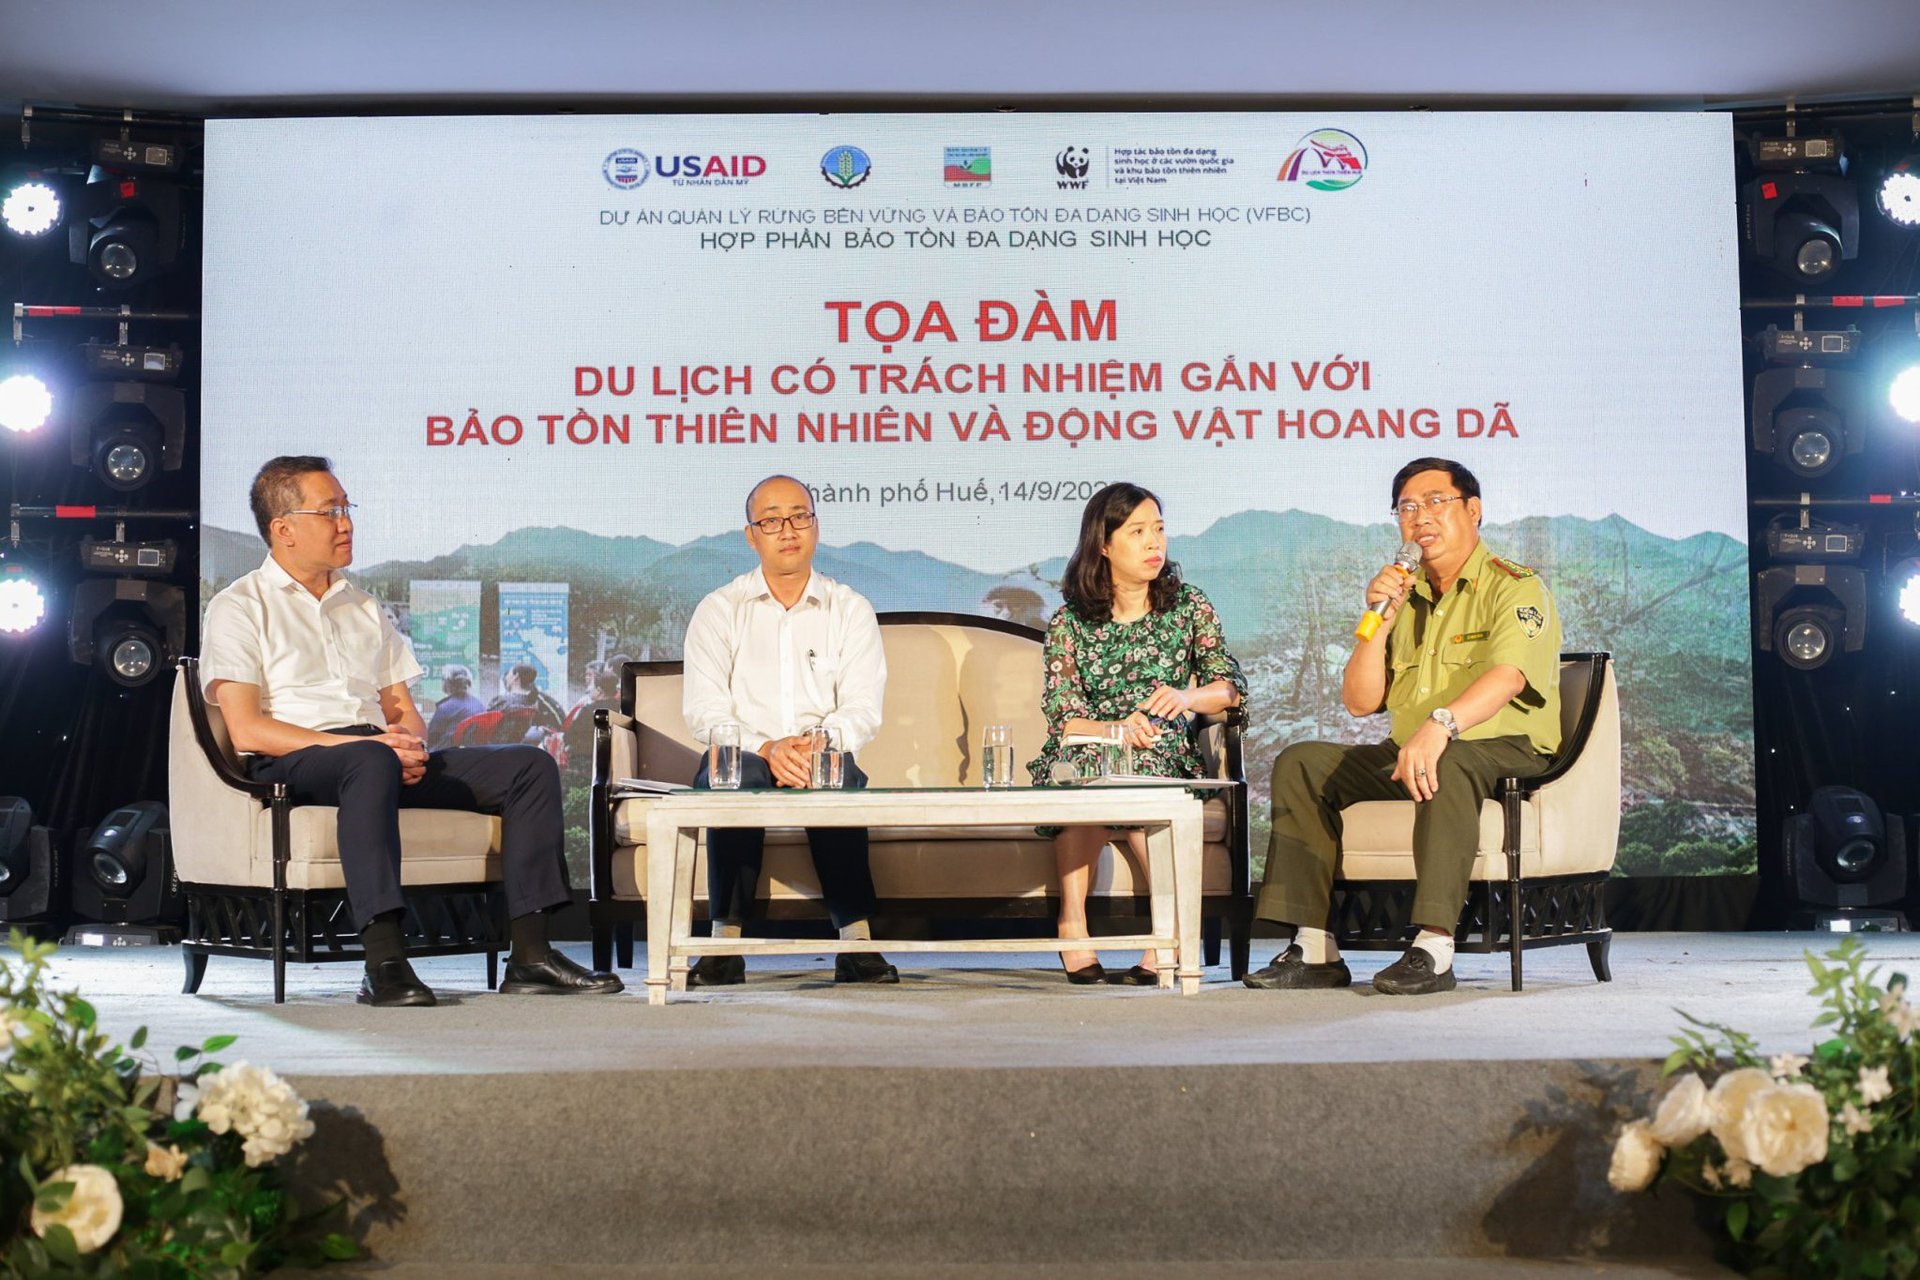 The panel discussion received several contributing ideas from the forestry protection, tourism, and private sectors operating in Thua Thien Hue province. Photo: CD.